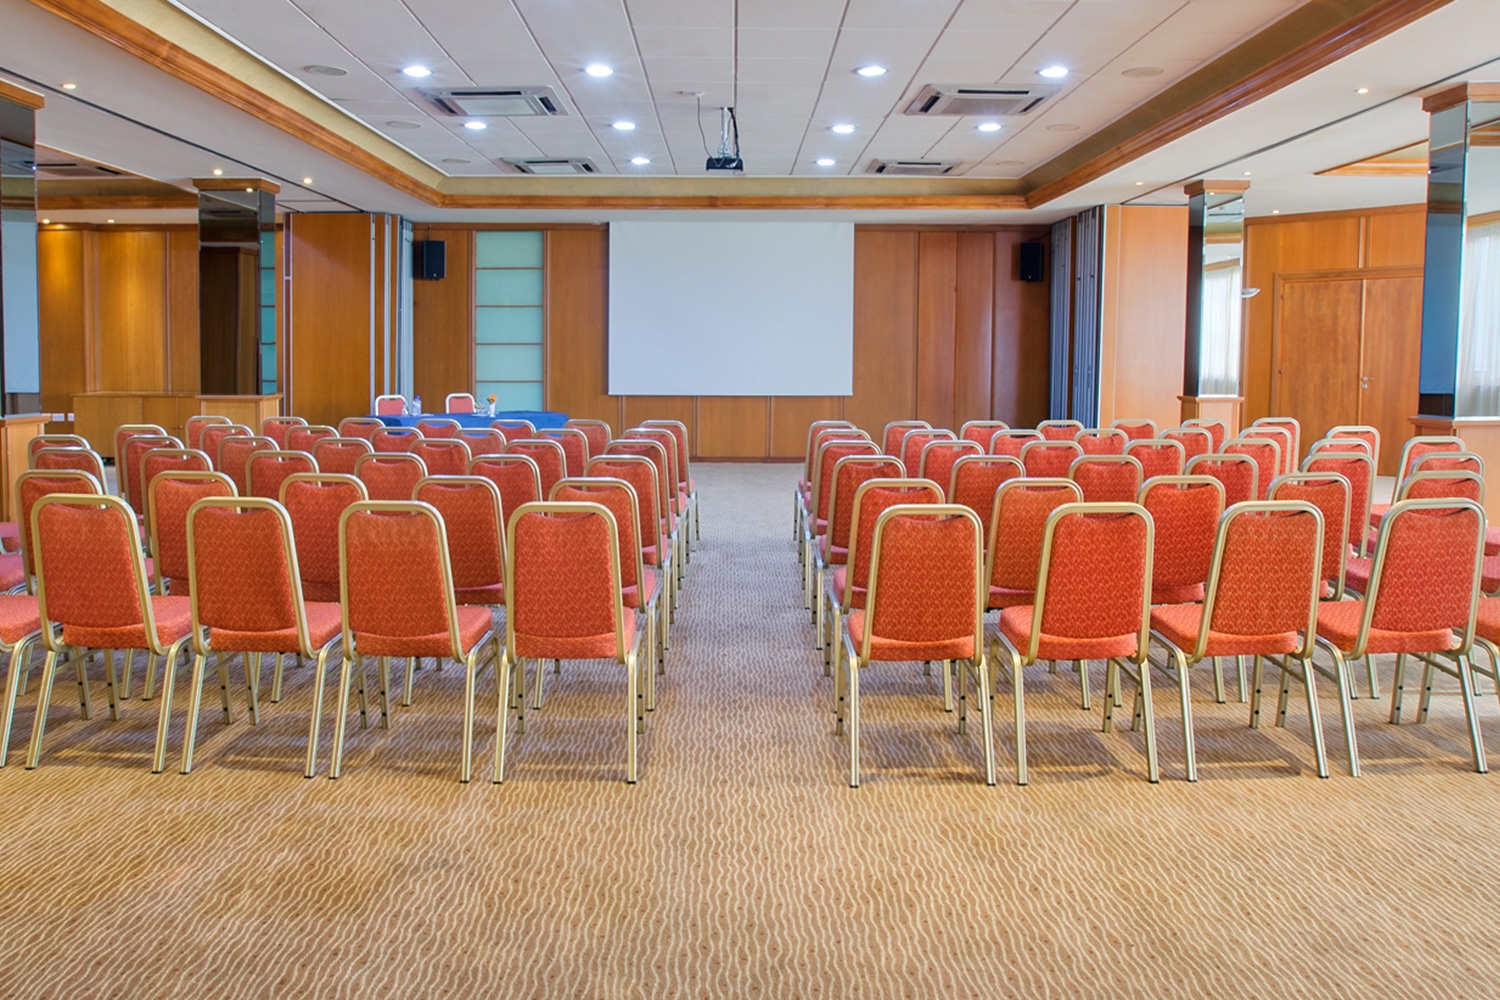 Lordos Beach Hotel - Conferences